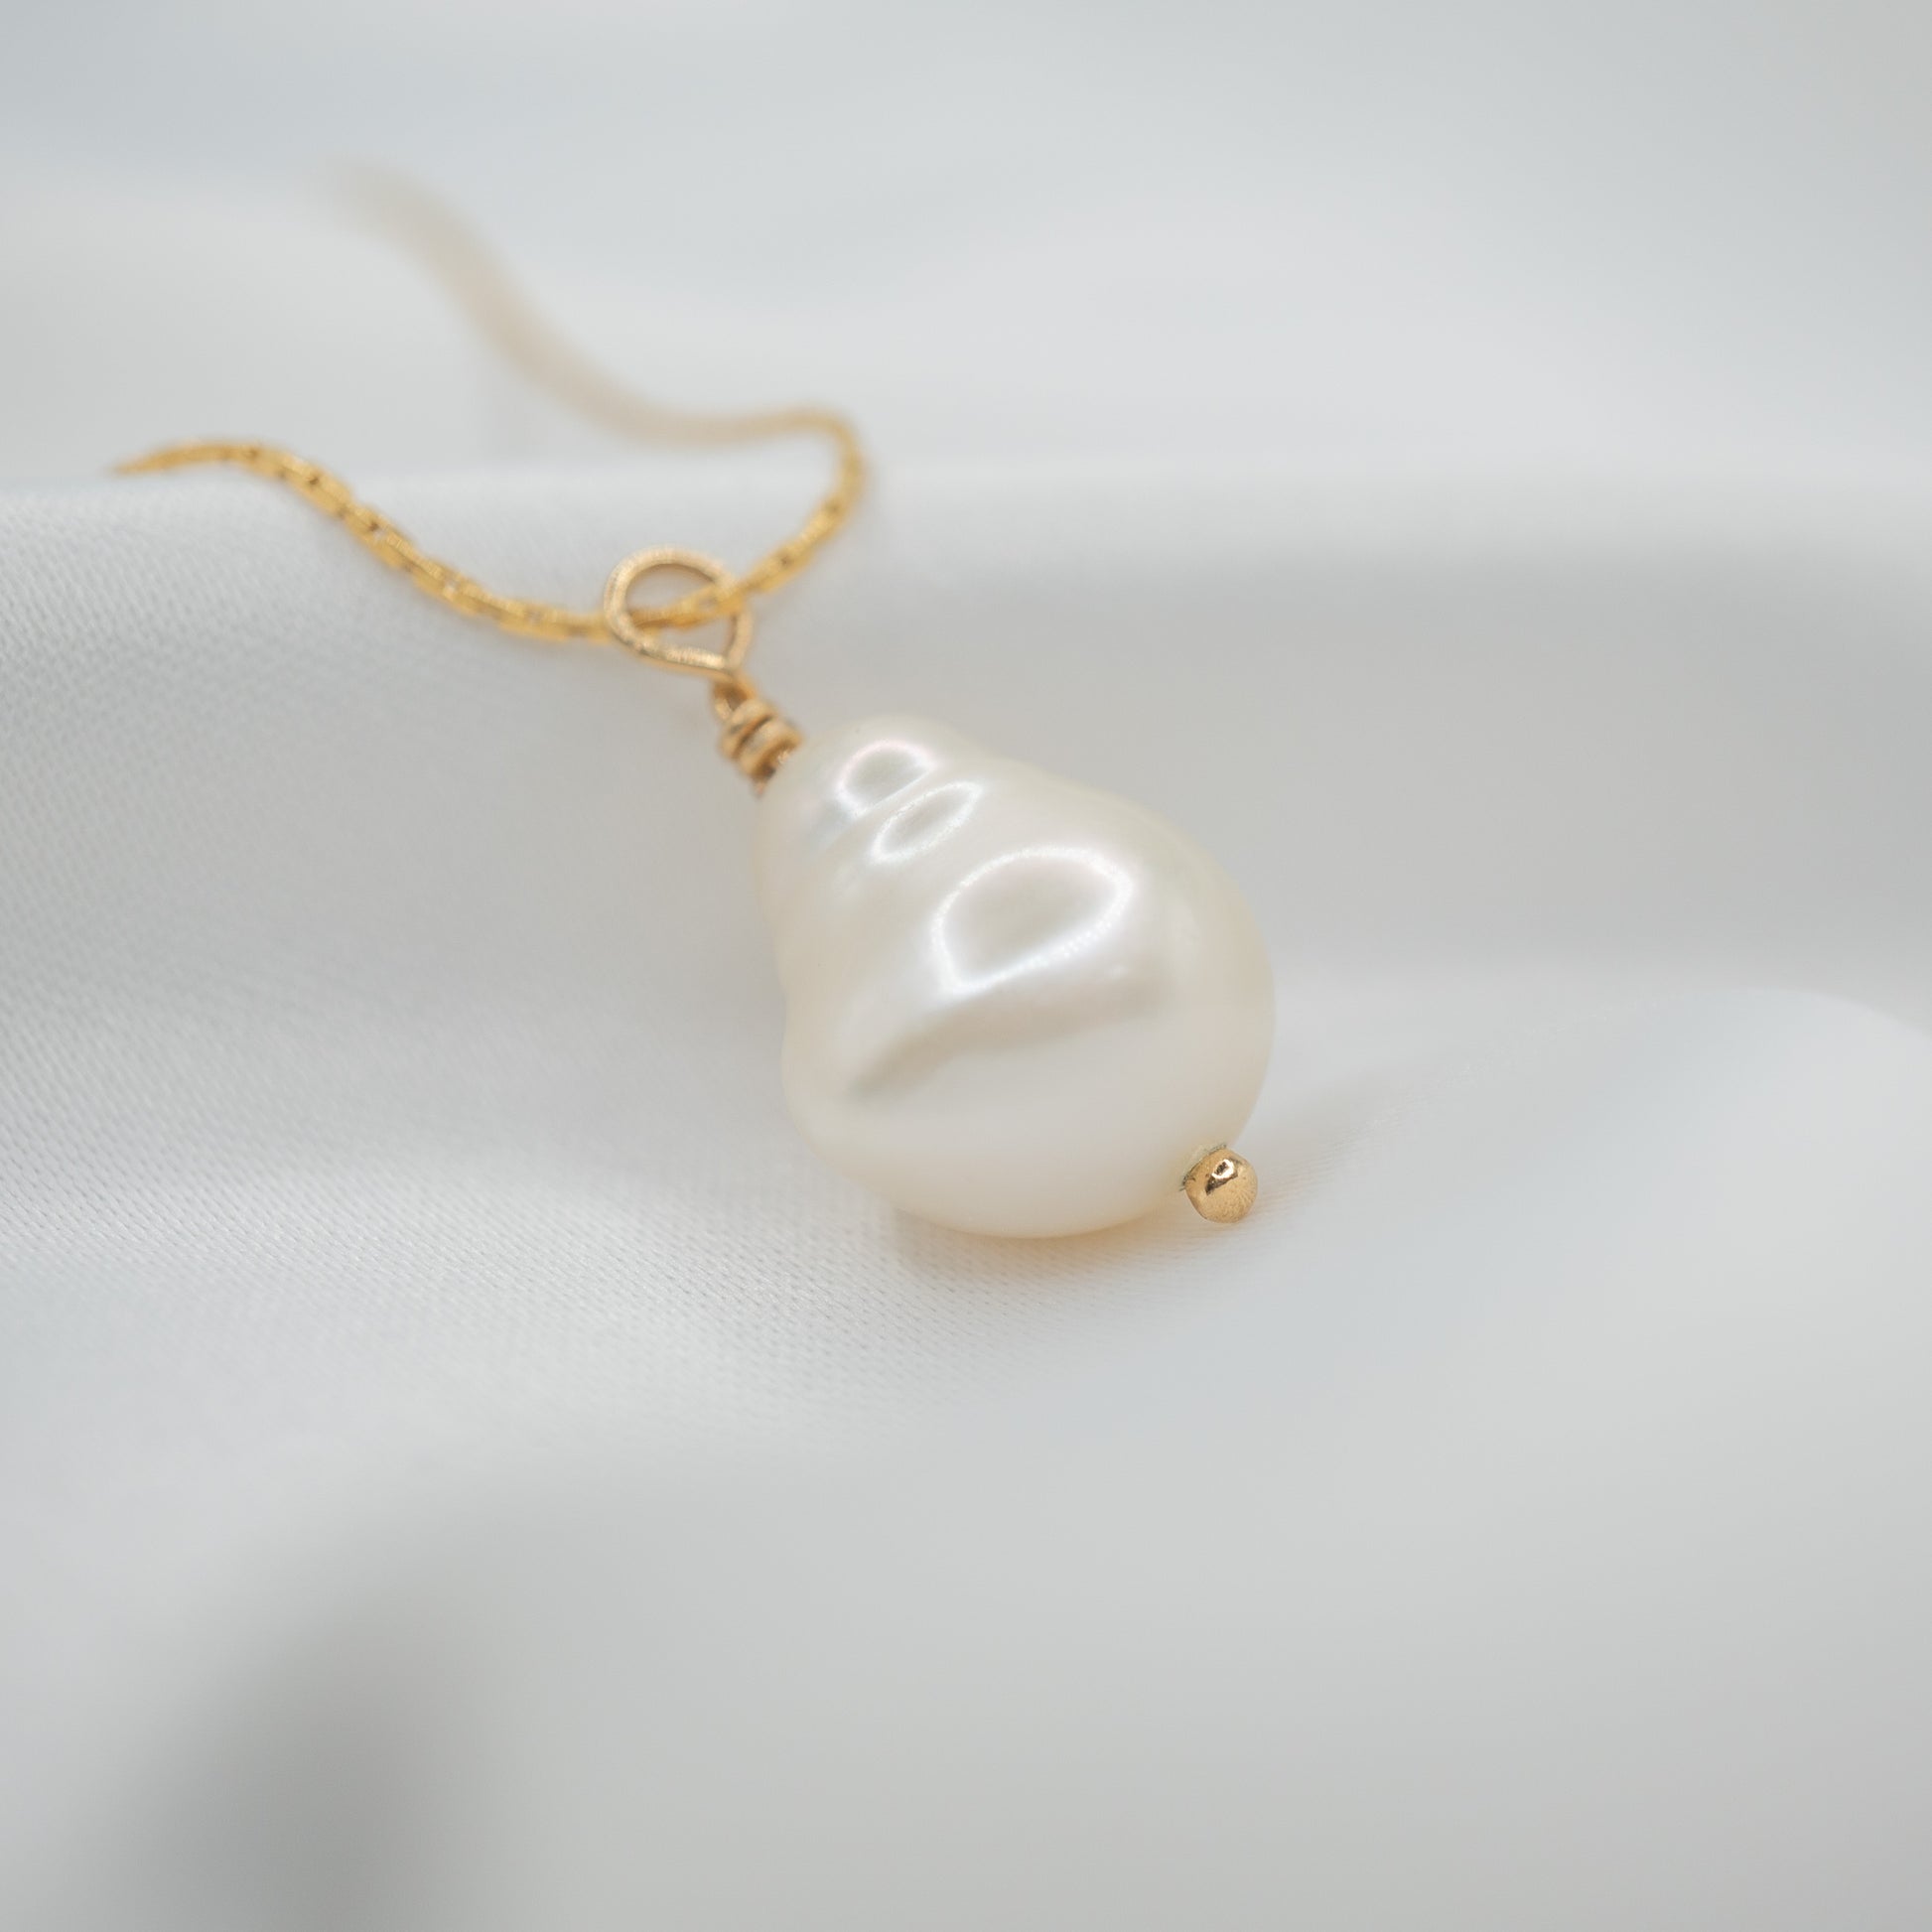 Gold Filled Baroque Pearl Pendant and Necklace - shot on white - close up